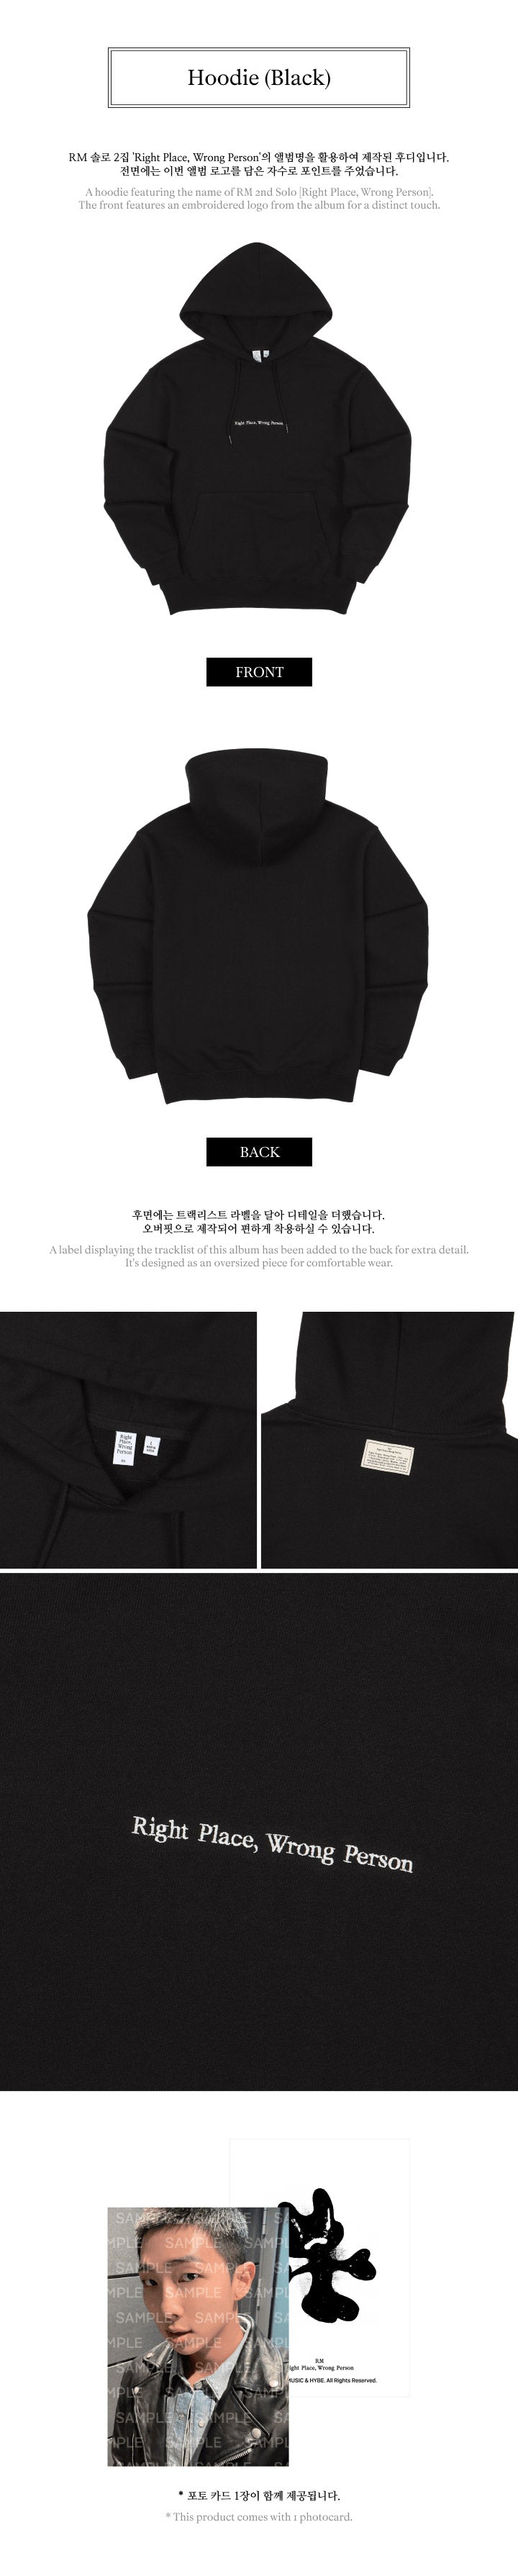 [PRE ORDER] RM - [RIGHT PLACE, WRONG PERSON] (Official MD) / Hoodie 